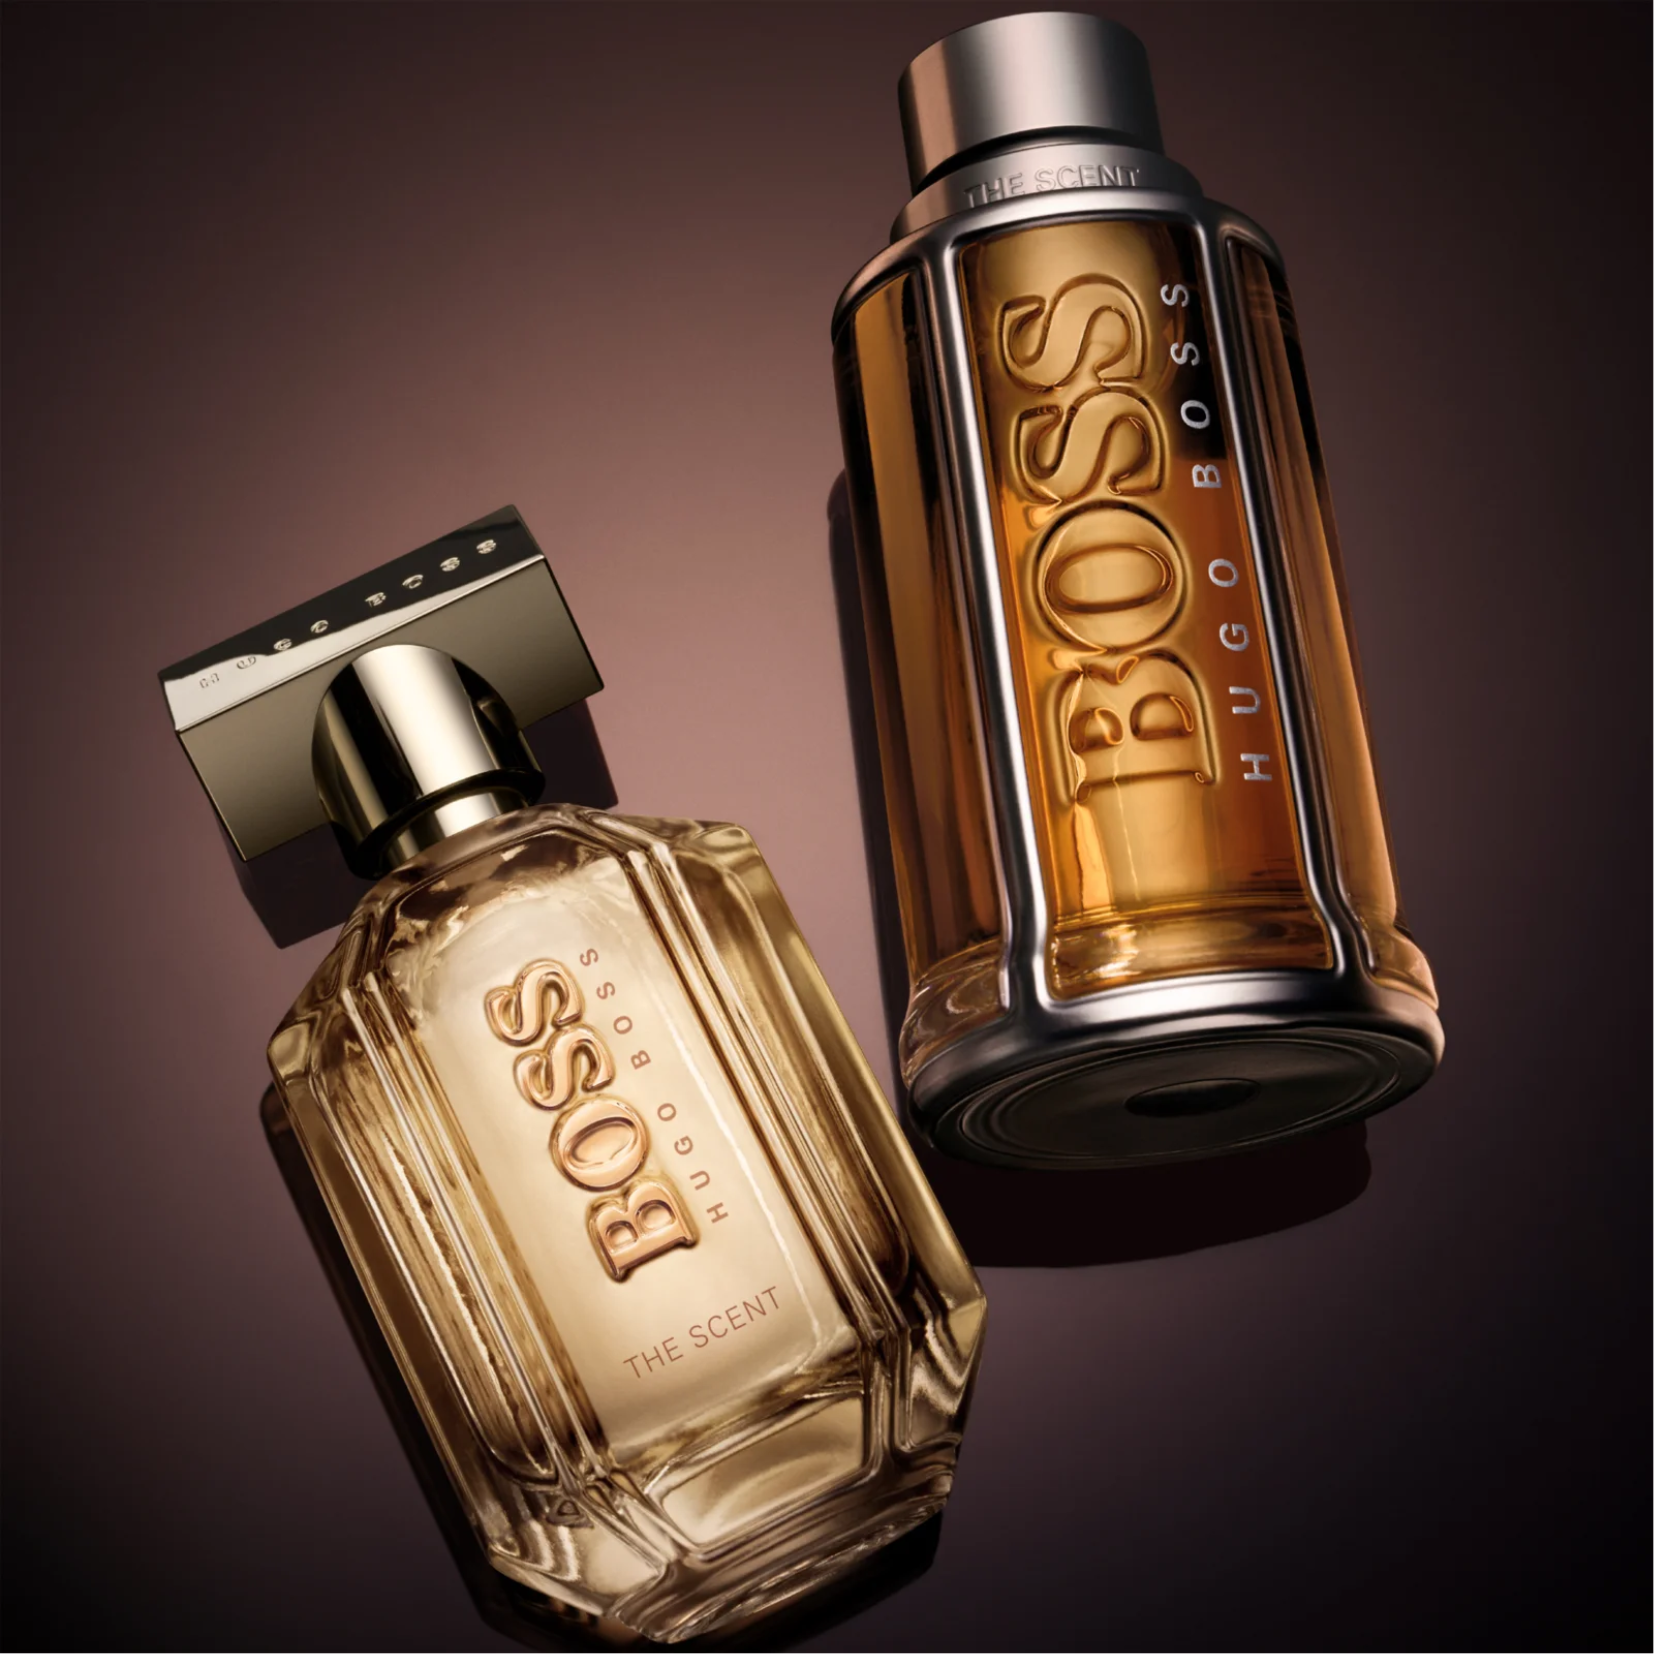 Buy Hugo Boss The Scent For Her EDT 100ml for P4495.00 Only!